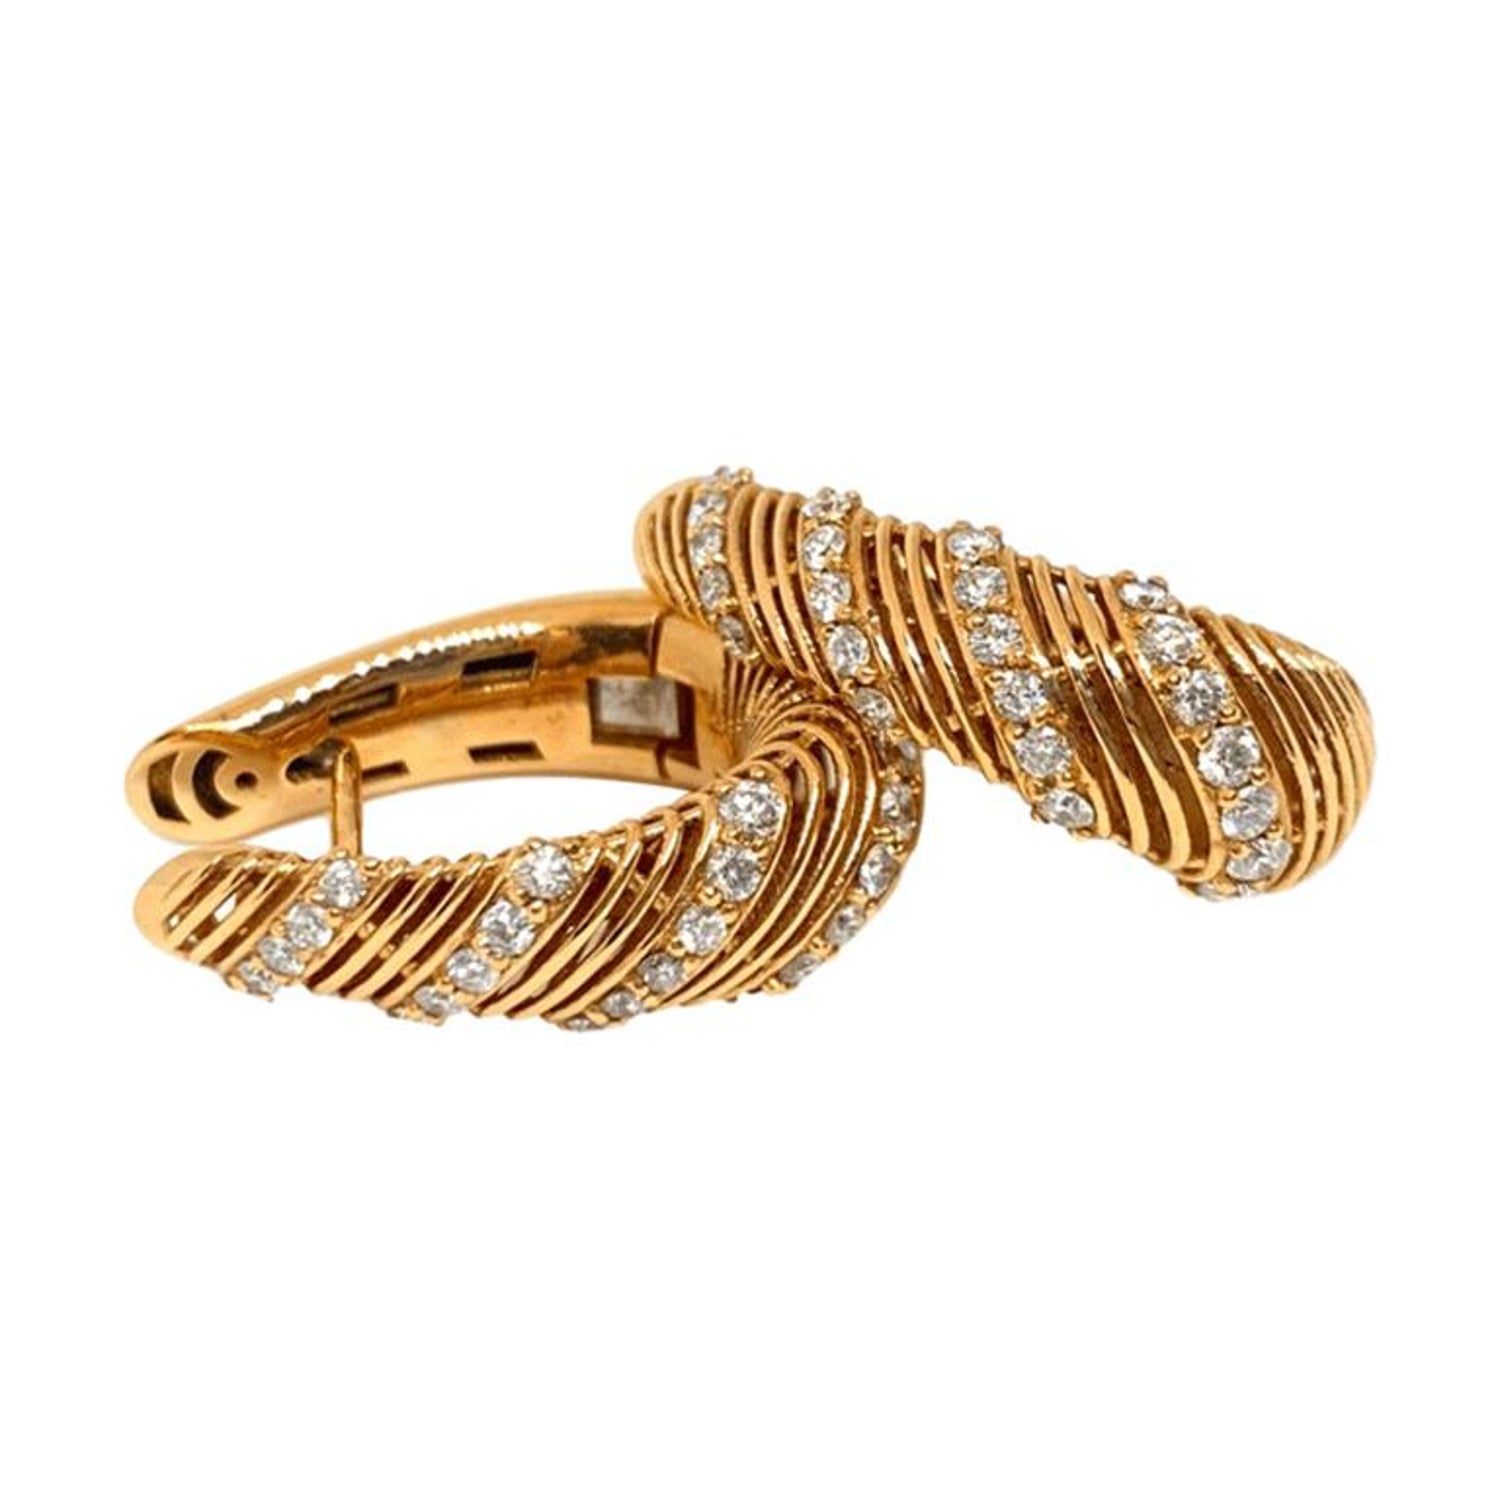 Louis Vuitton Idylle Blossom Small Hoop, Yellow Gold and Diamond - per Unit Gold. Size NSA